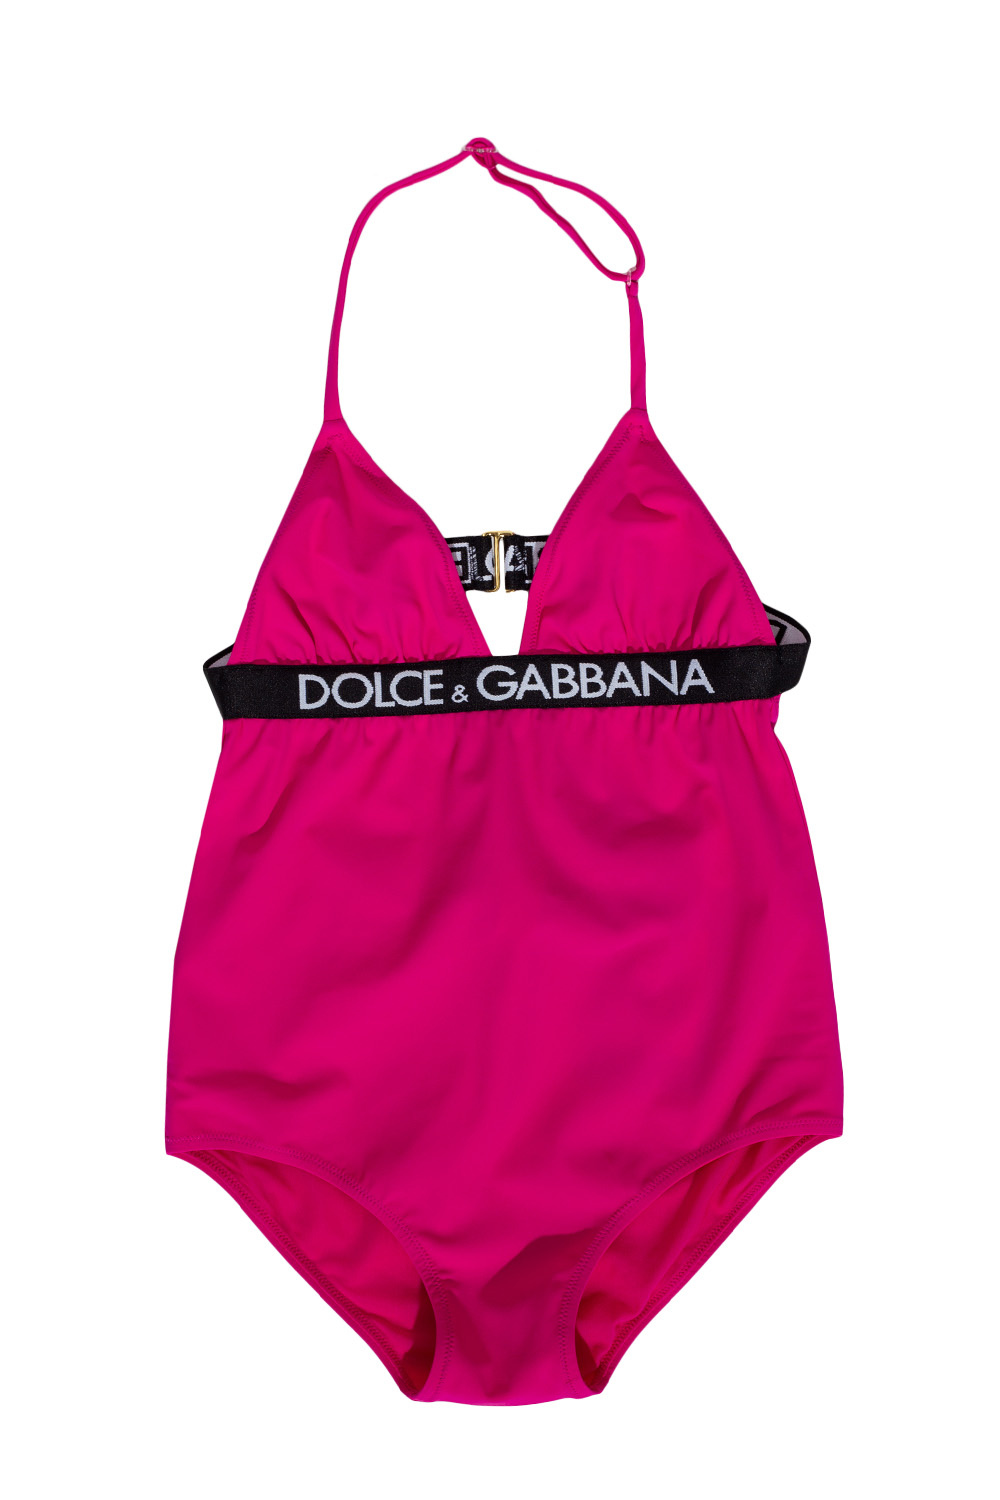 Dolce & Gabbana crystal-embellished palm tree brooch One-piece swimsuit